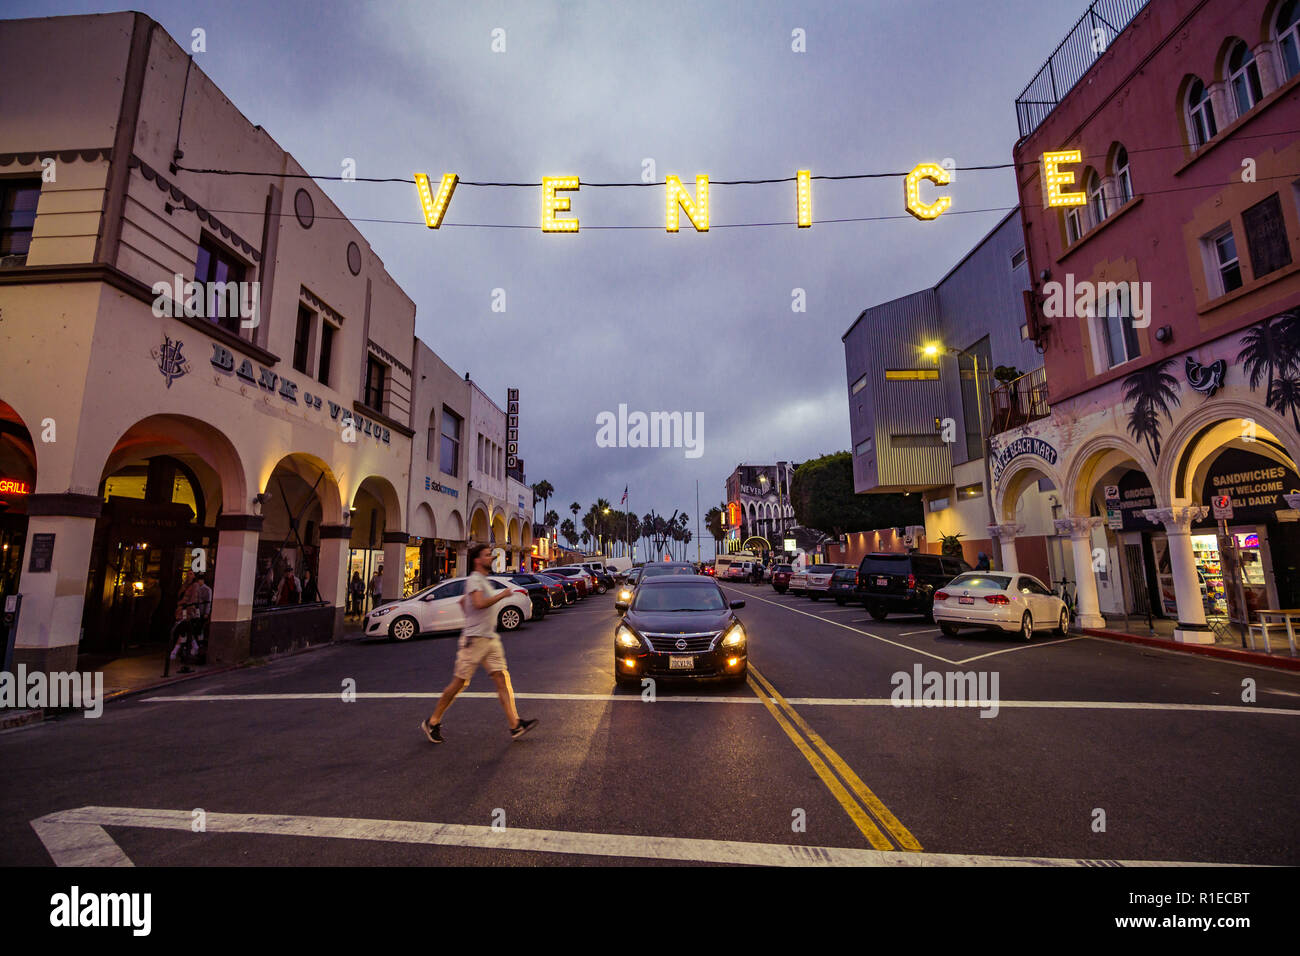 The famous sign at Venice Beach, Los Angeles, California Stock Photo